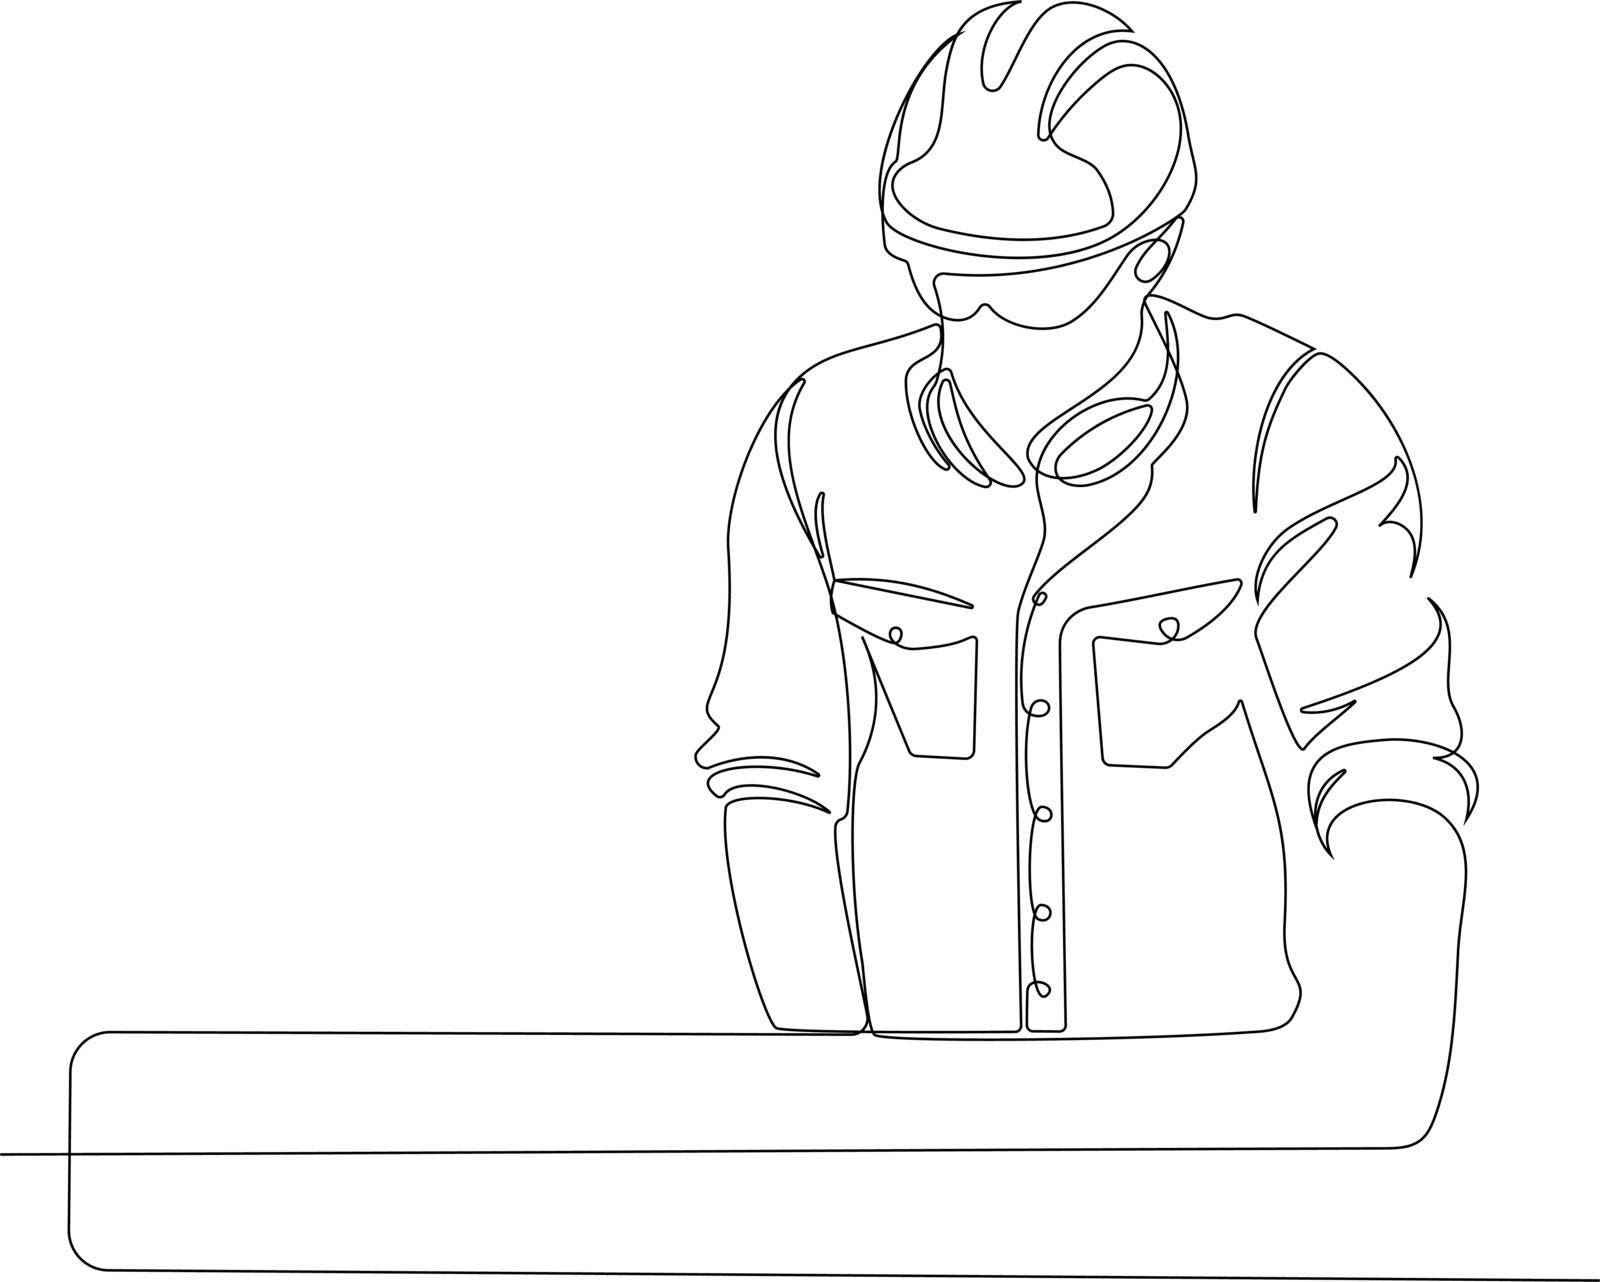 Carpenter with a protective equipment is putting wooden plank in the machine for further processing. Vector illustration